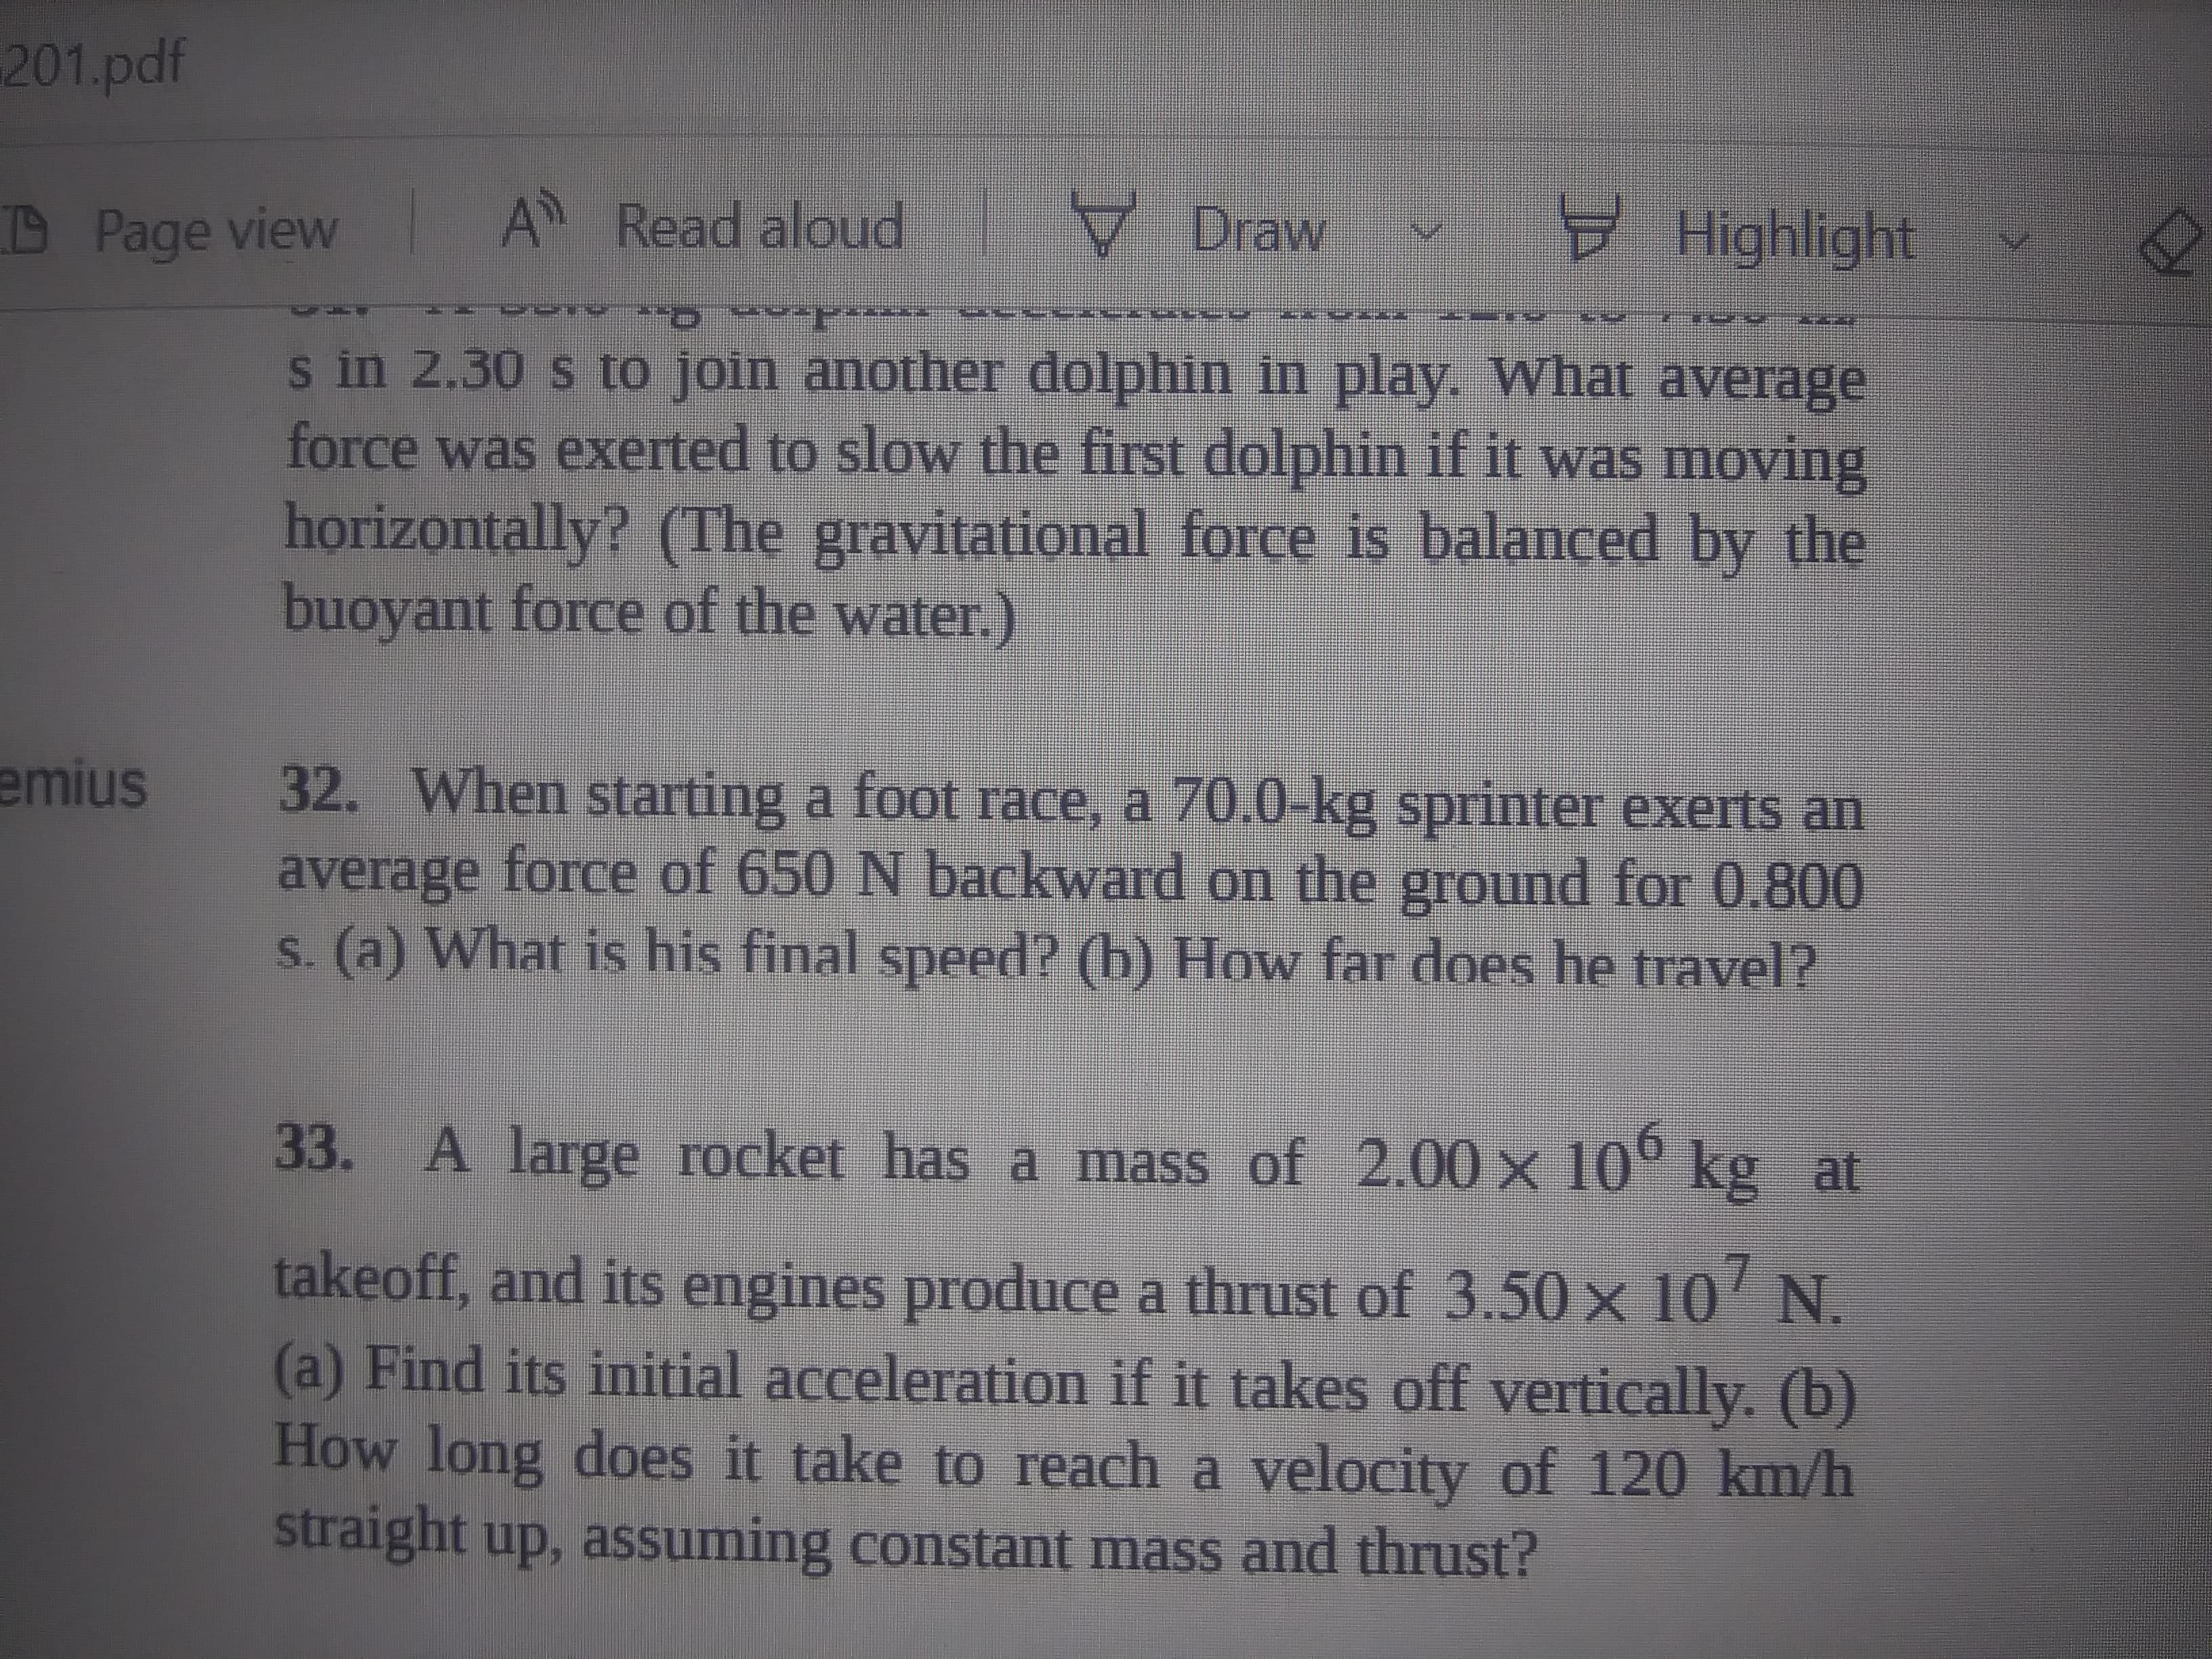 33. A large rocket has a mass of 2.00 x 10° kg at
takeoff, and its engines produce a thrust of 3.50 x 10' N.
(a) Find its initial acceleration if it takes off vertically. (b)
How long does it take to reach a velocity of 120 km/h
straight up, assuming constant mass and thrust?
